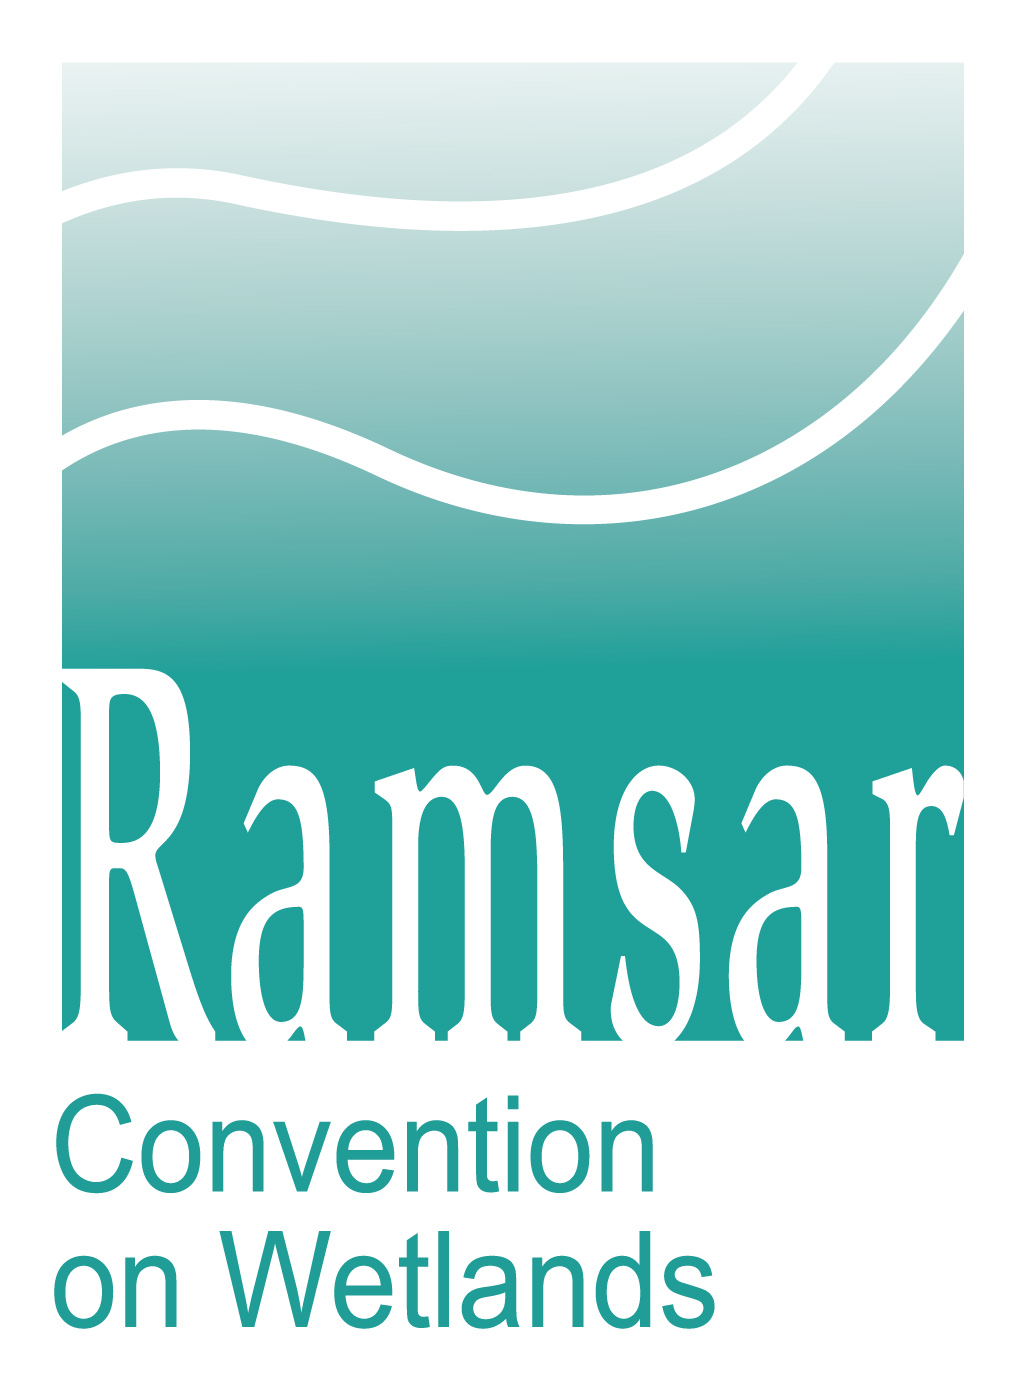 official English version of Ramsar logo, which says 'Convention on Wetlands'